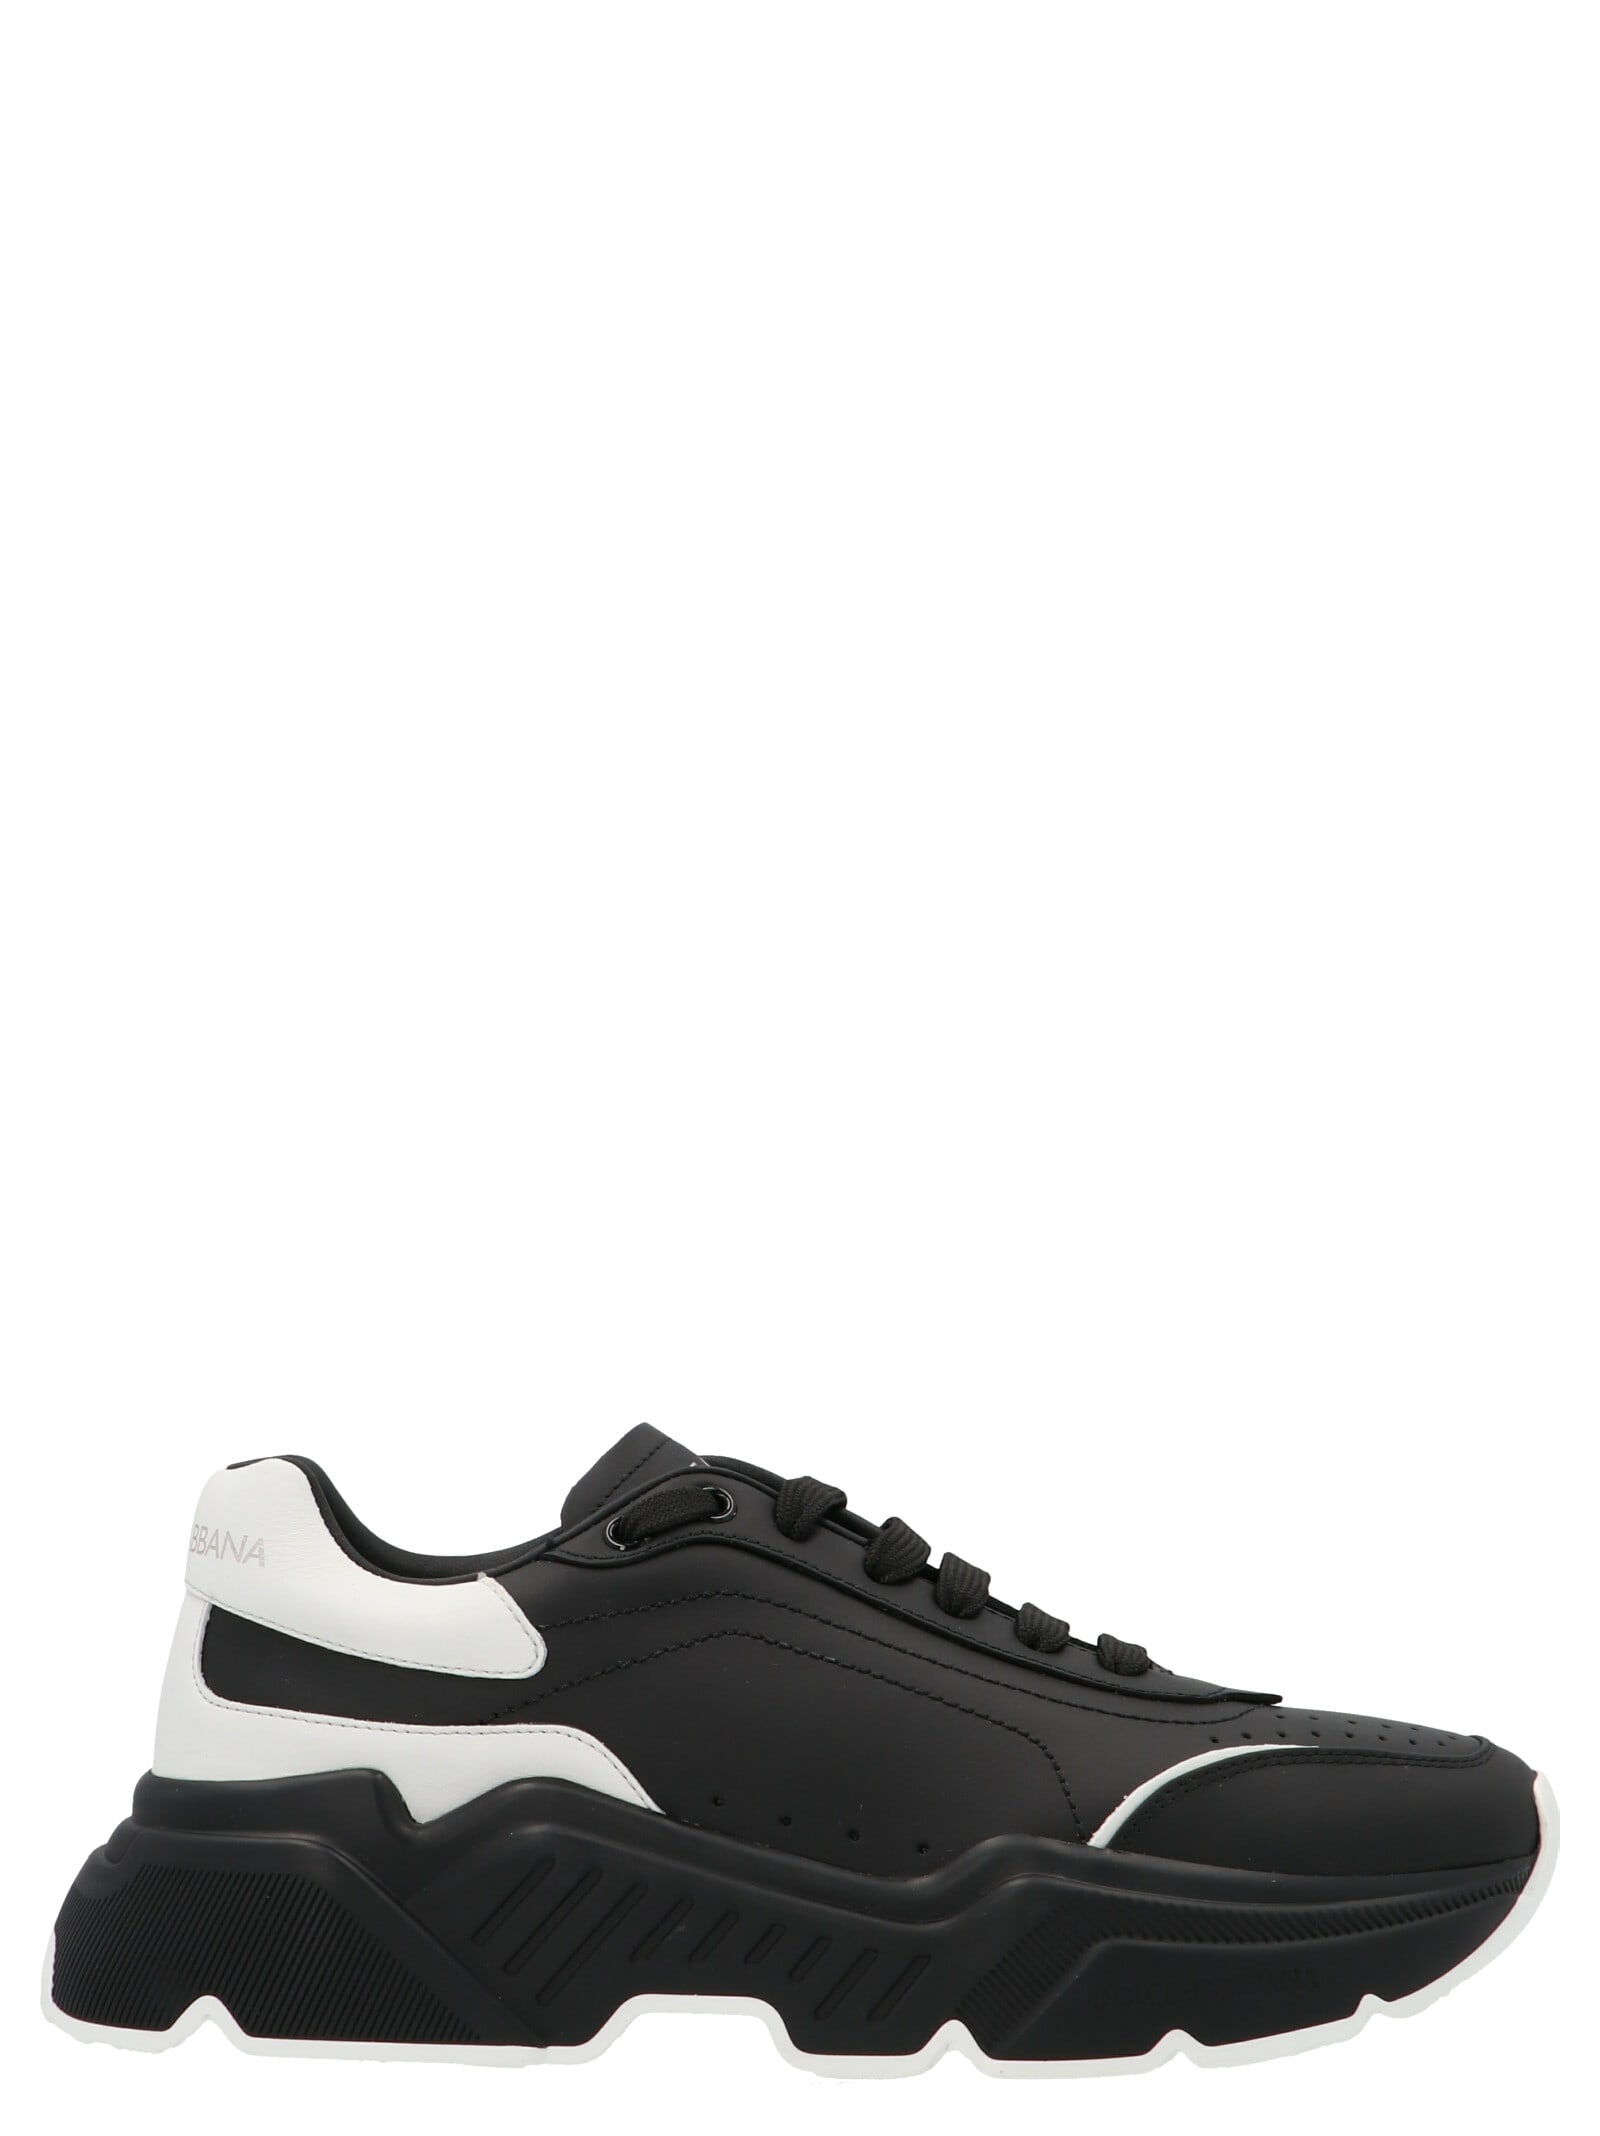 Dolce & Gabbana daymaster Sneakers